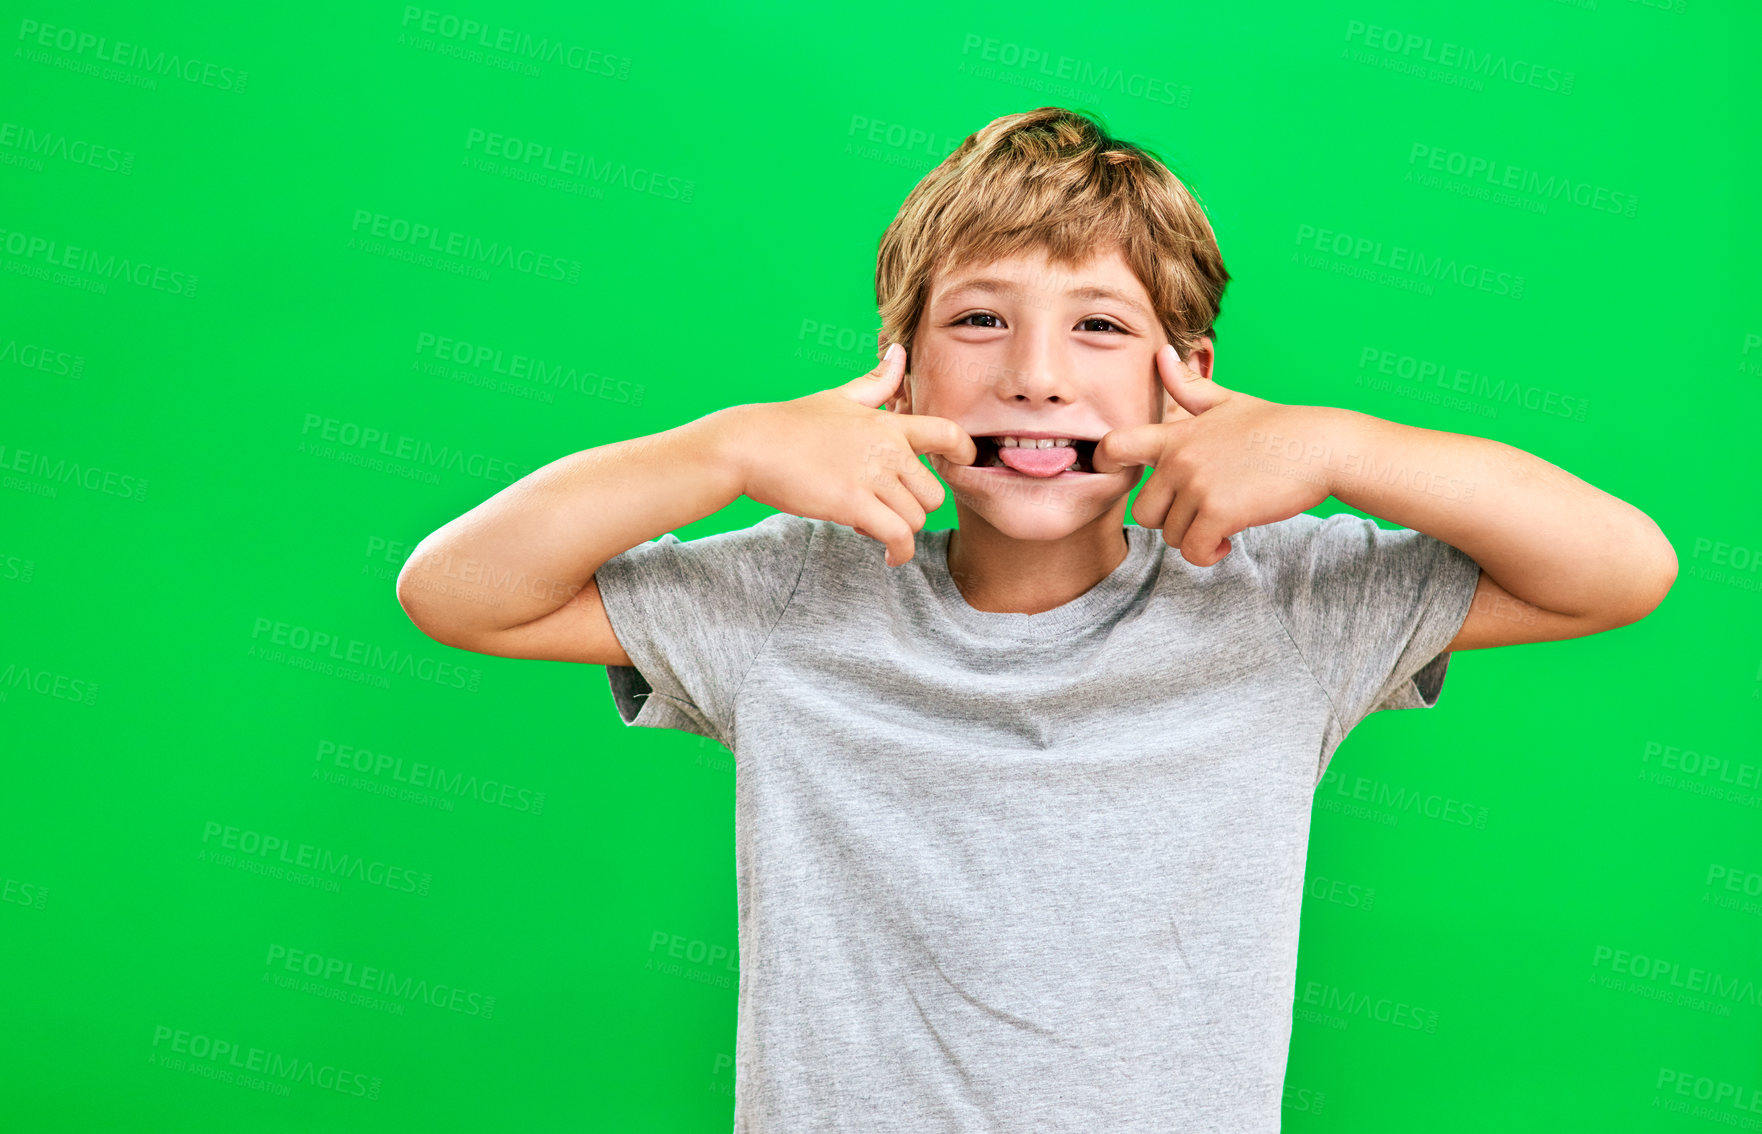 Buy stock photo Studio portrait of a young boy making a funny face against a green background